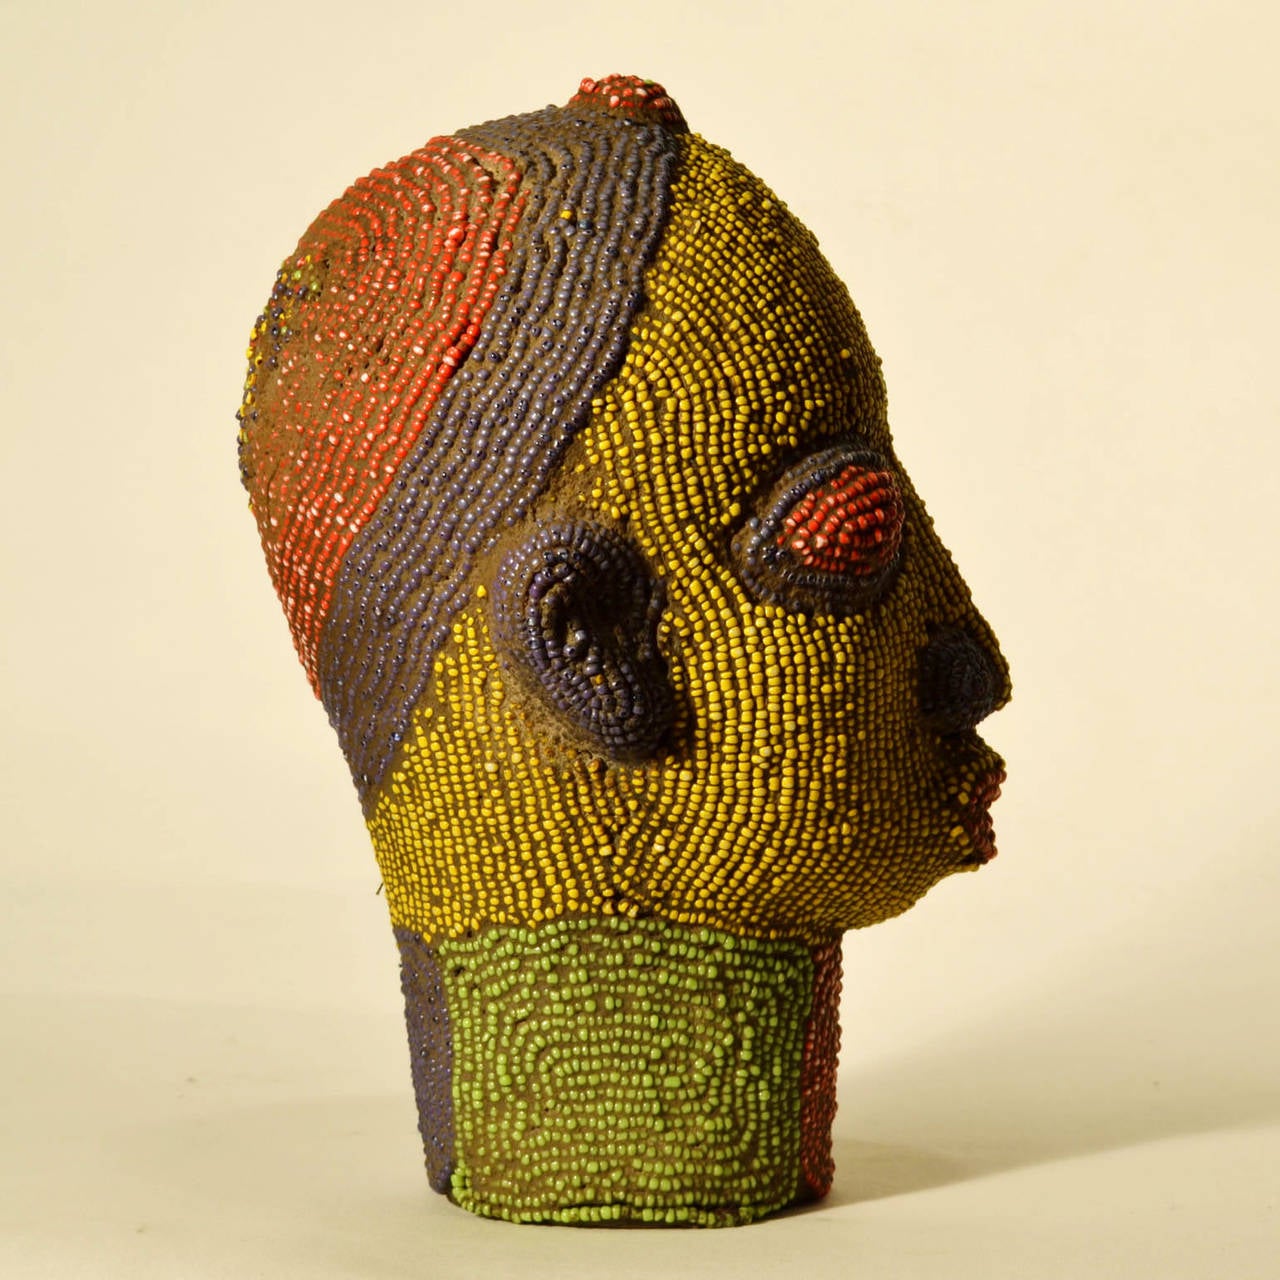 Brightly colored beaded terracotta head commissioned in the 1960's to decorate wealthy Nigerian homes. The terracotta sculpture is inlaid with strings of beads over its ceramic form.
They sometimes came in pairs as man and women or two females.
The